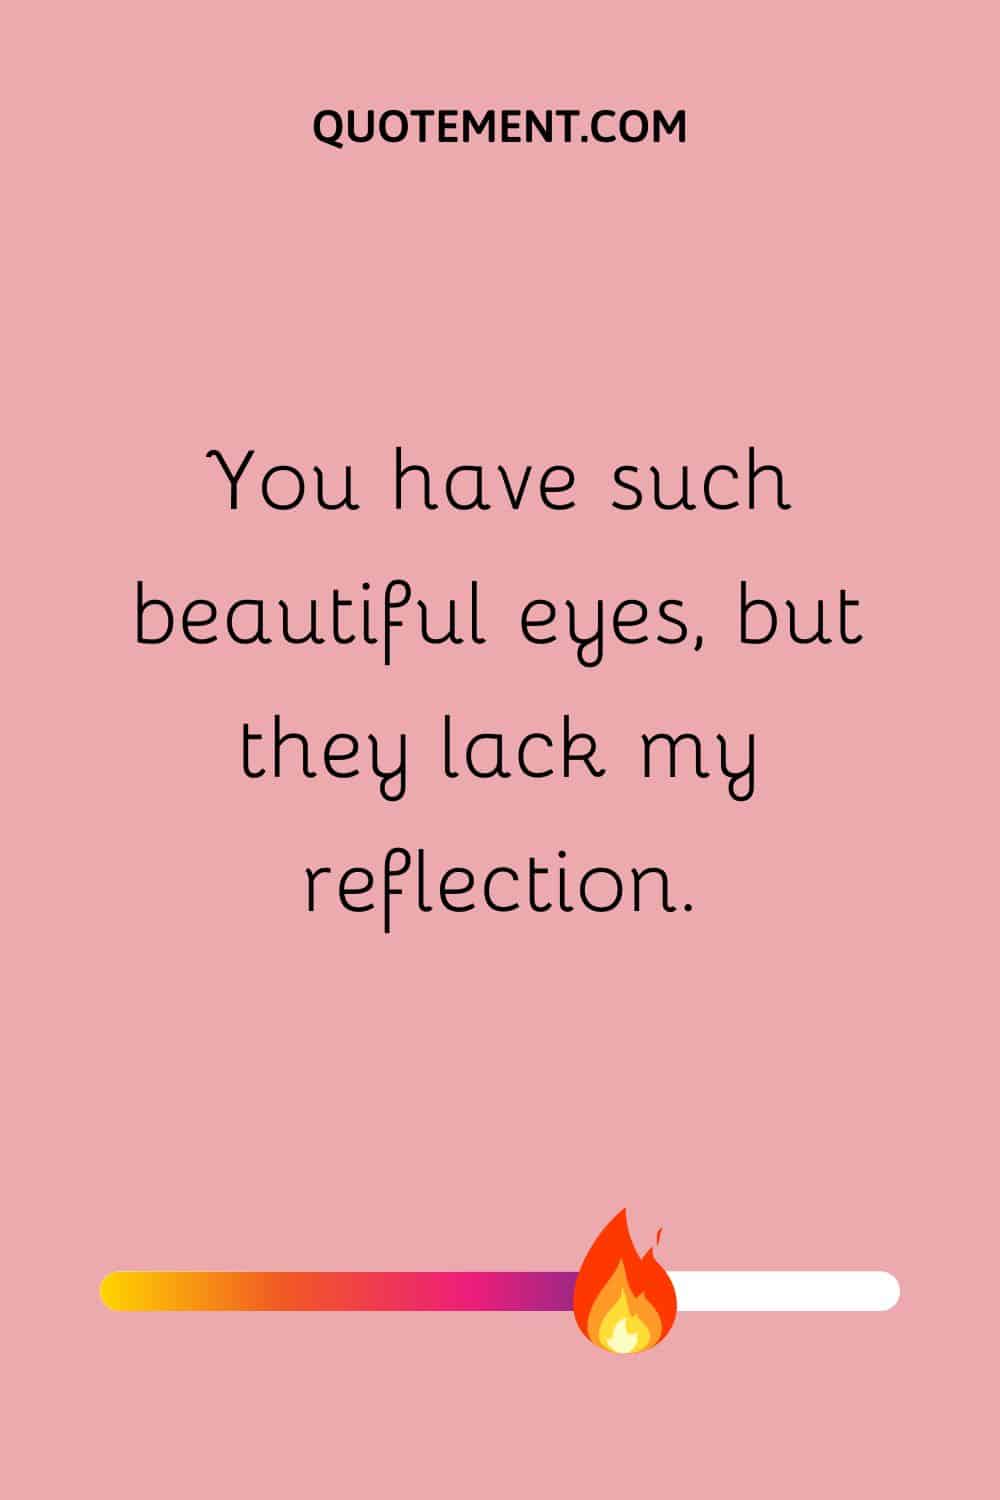 You have such beautiful eyes, but they lack my reflection